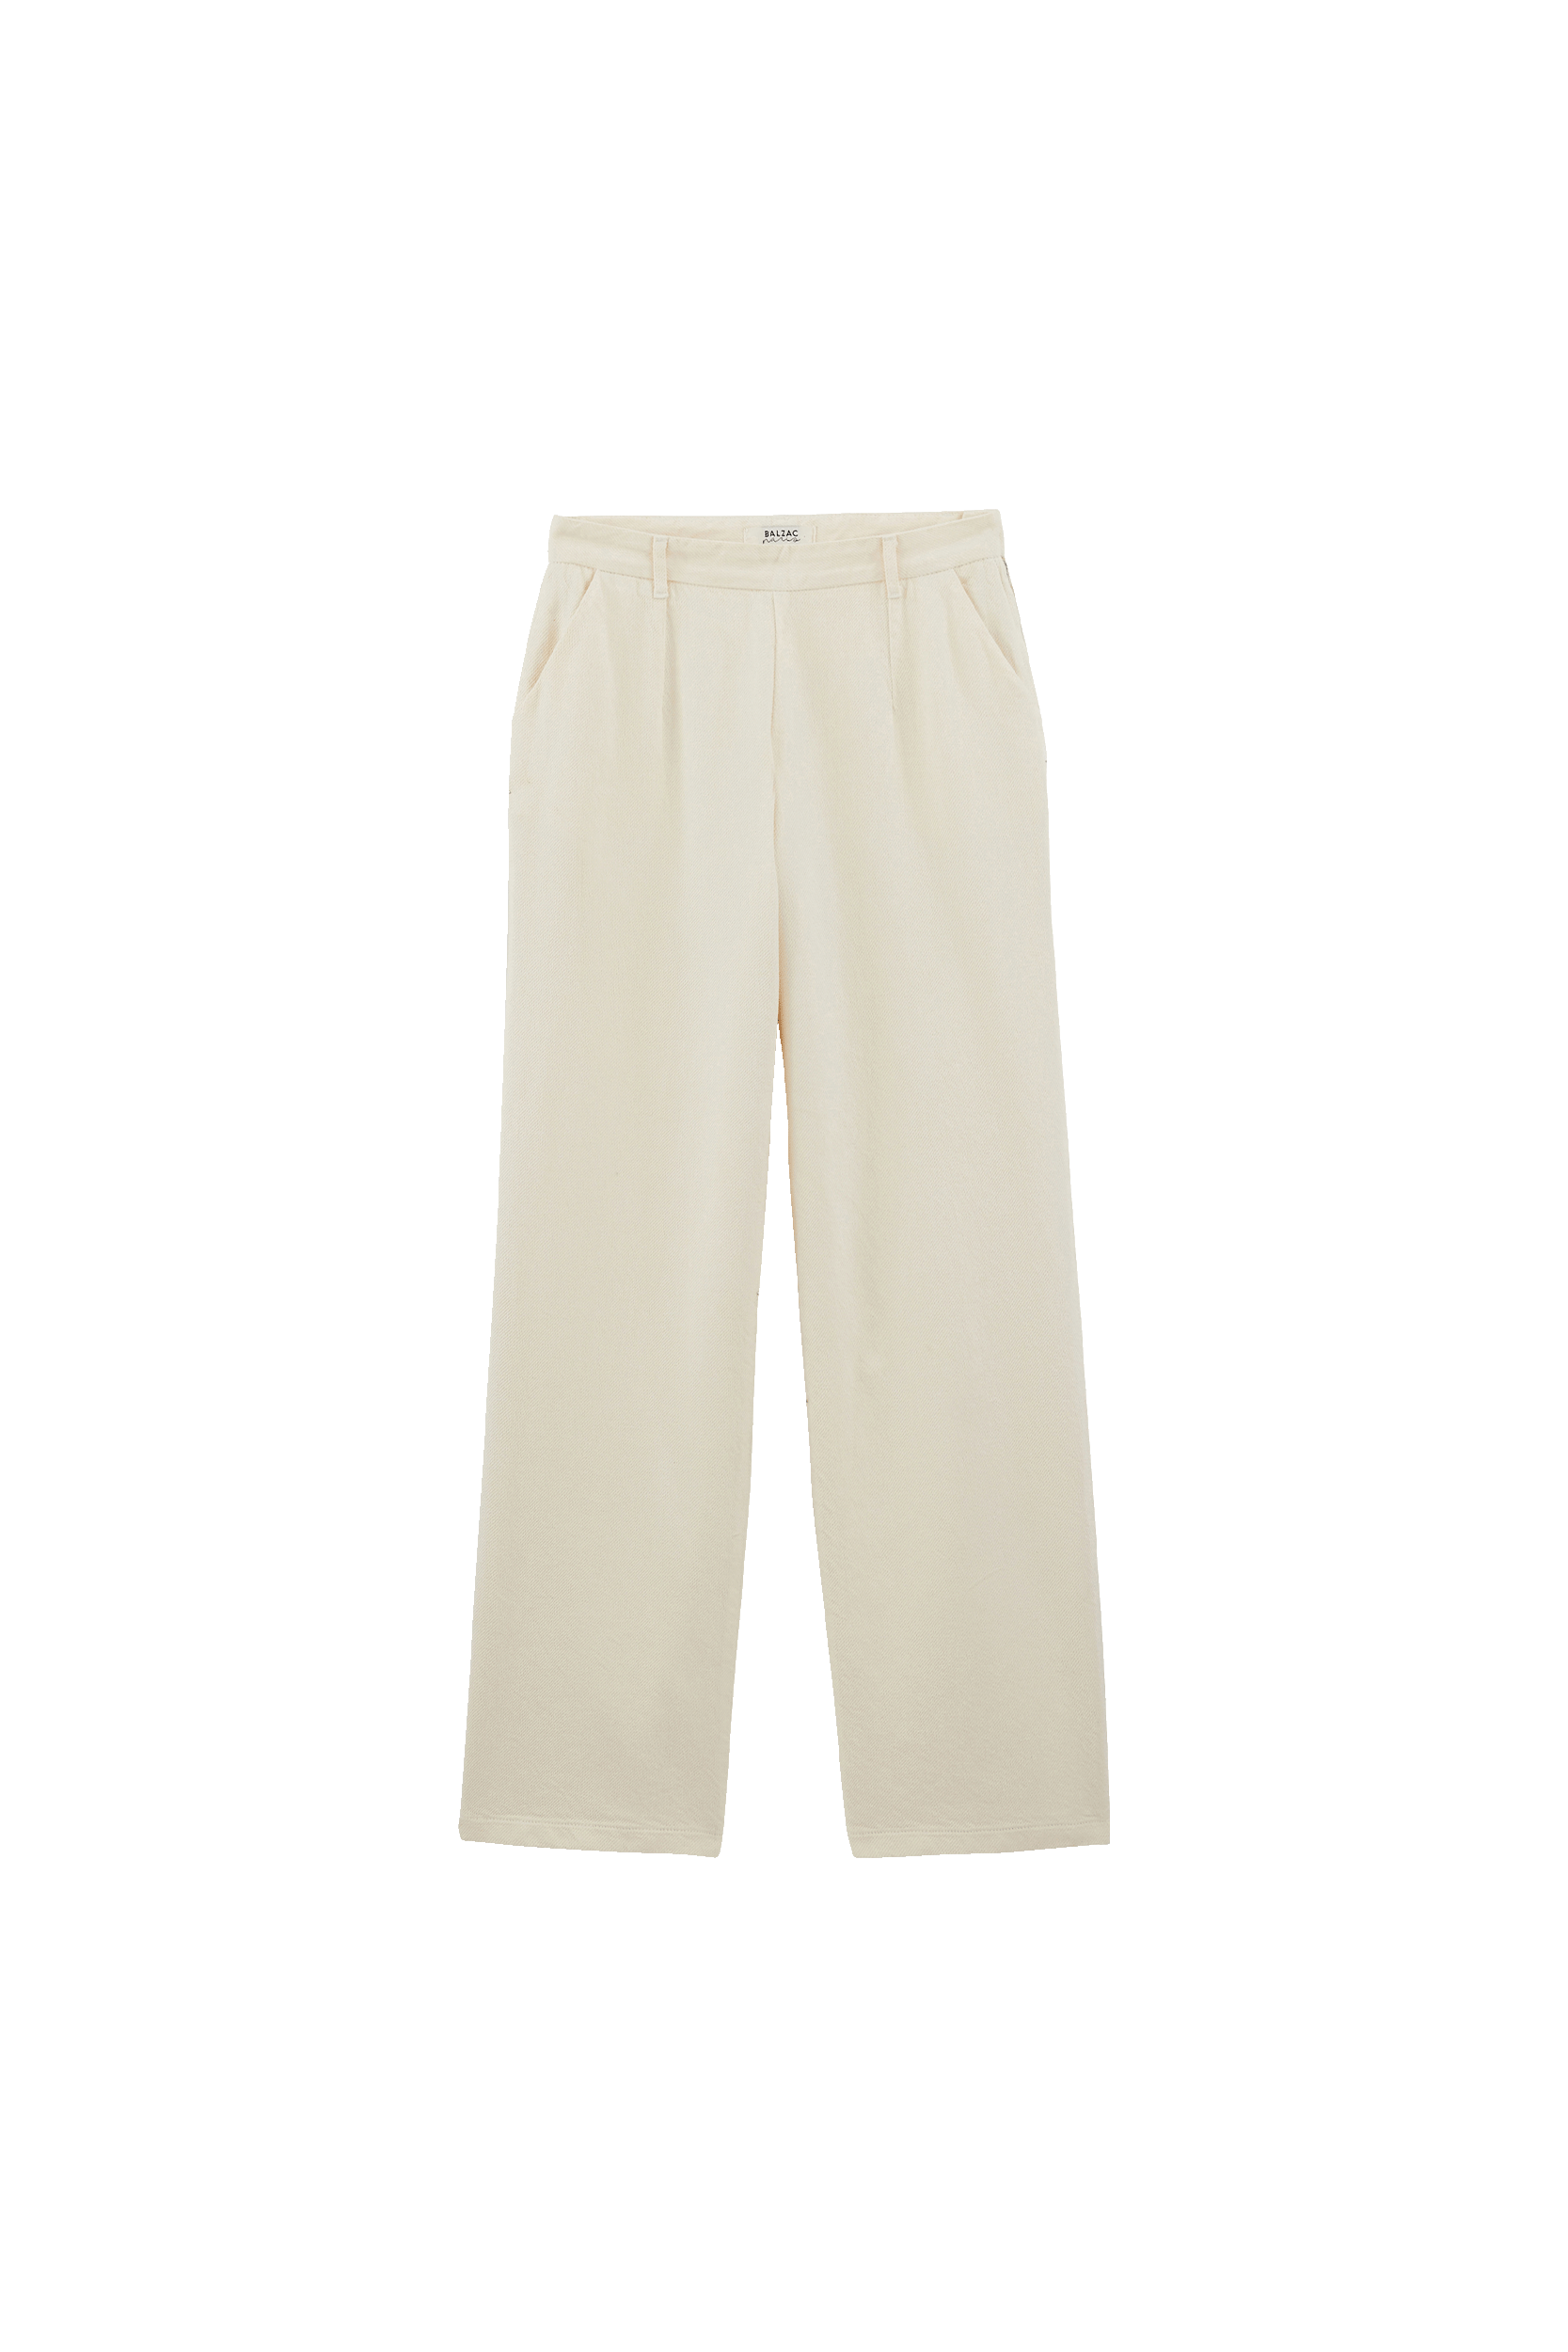 Paolo creme brulee trousers